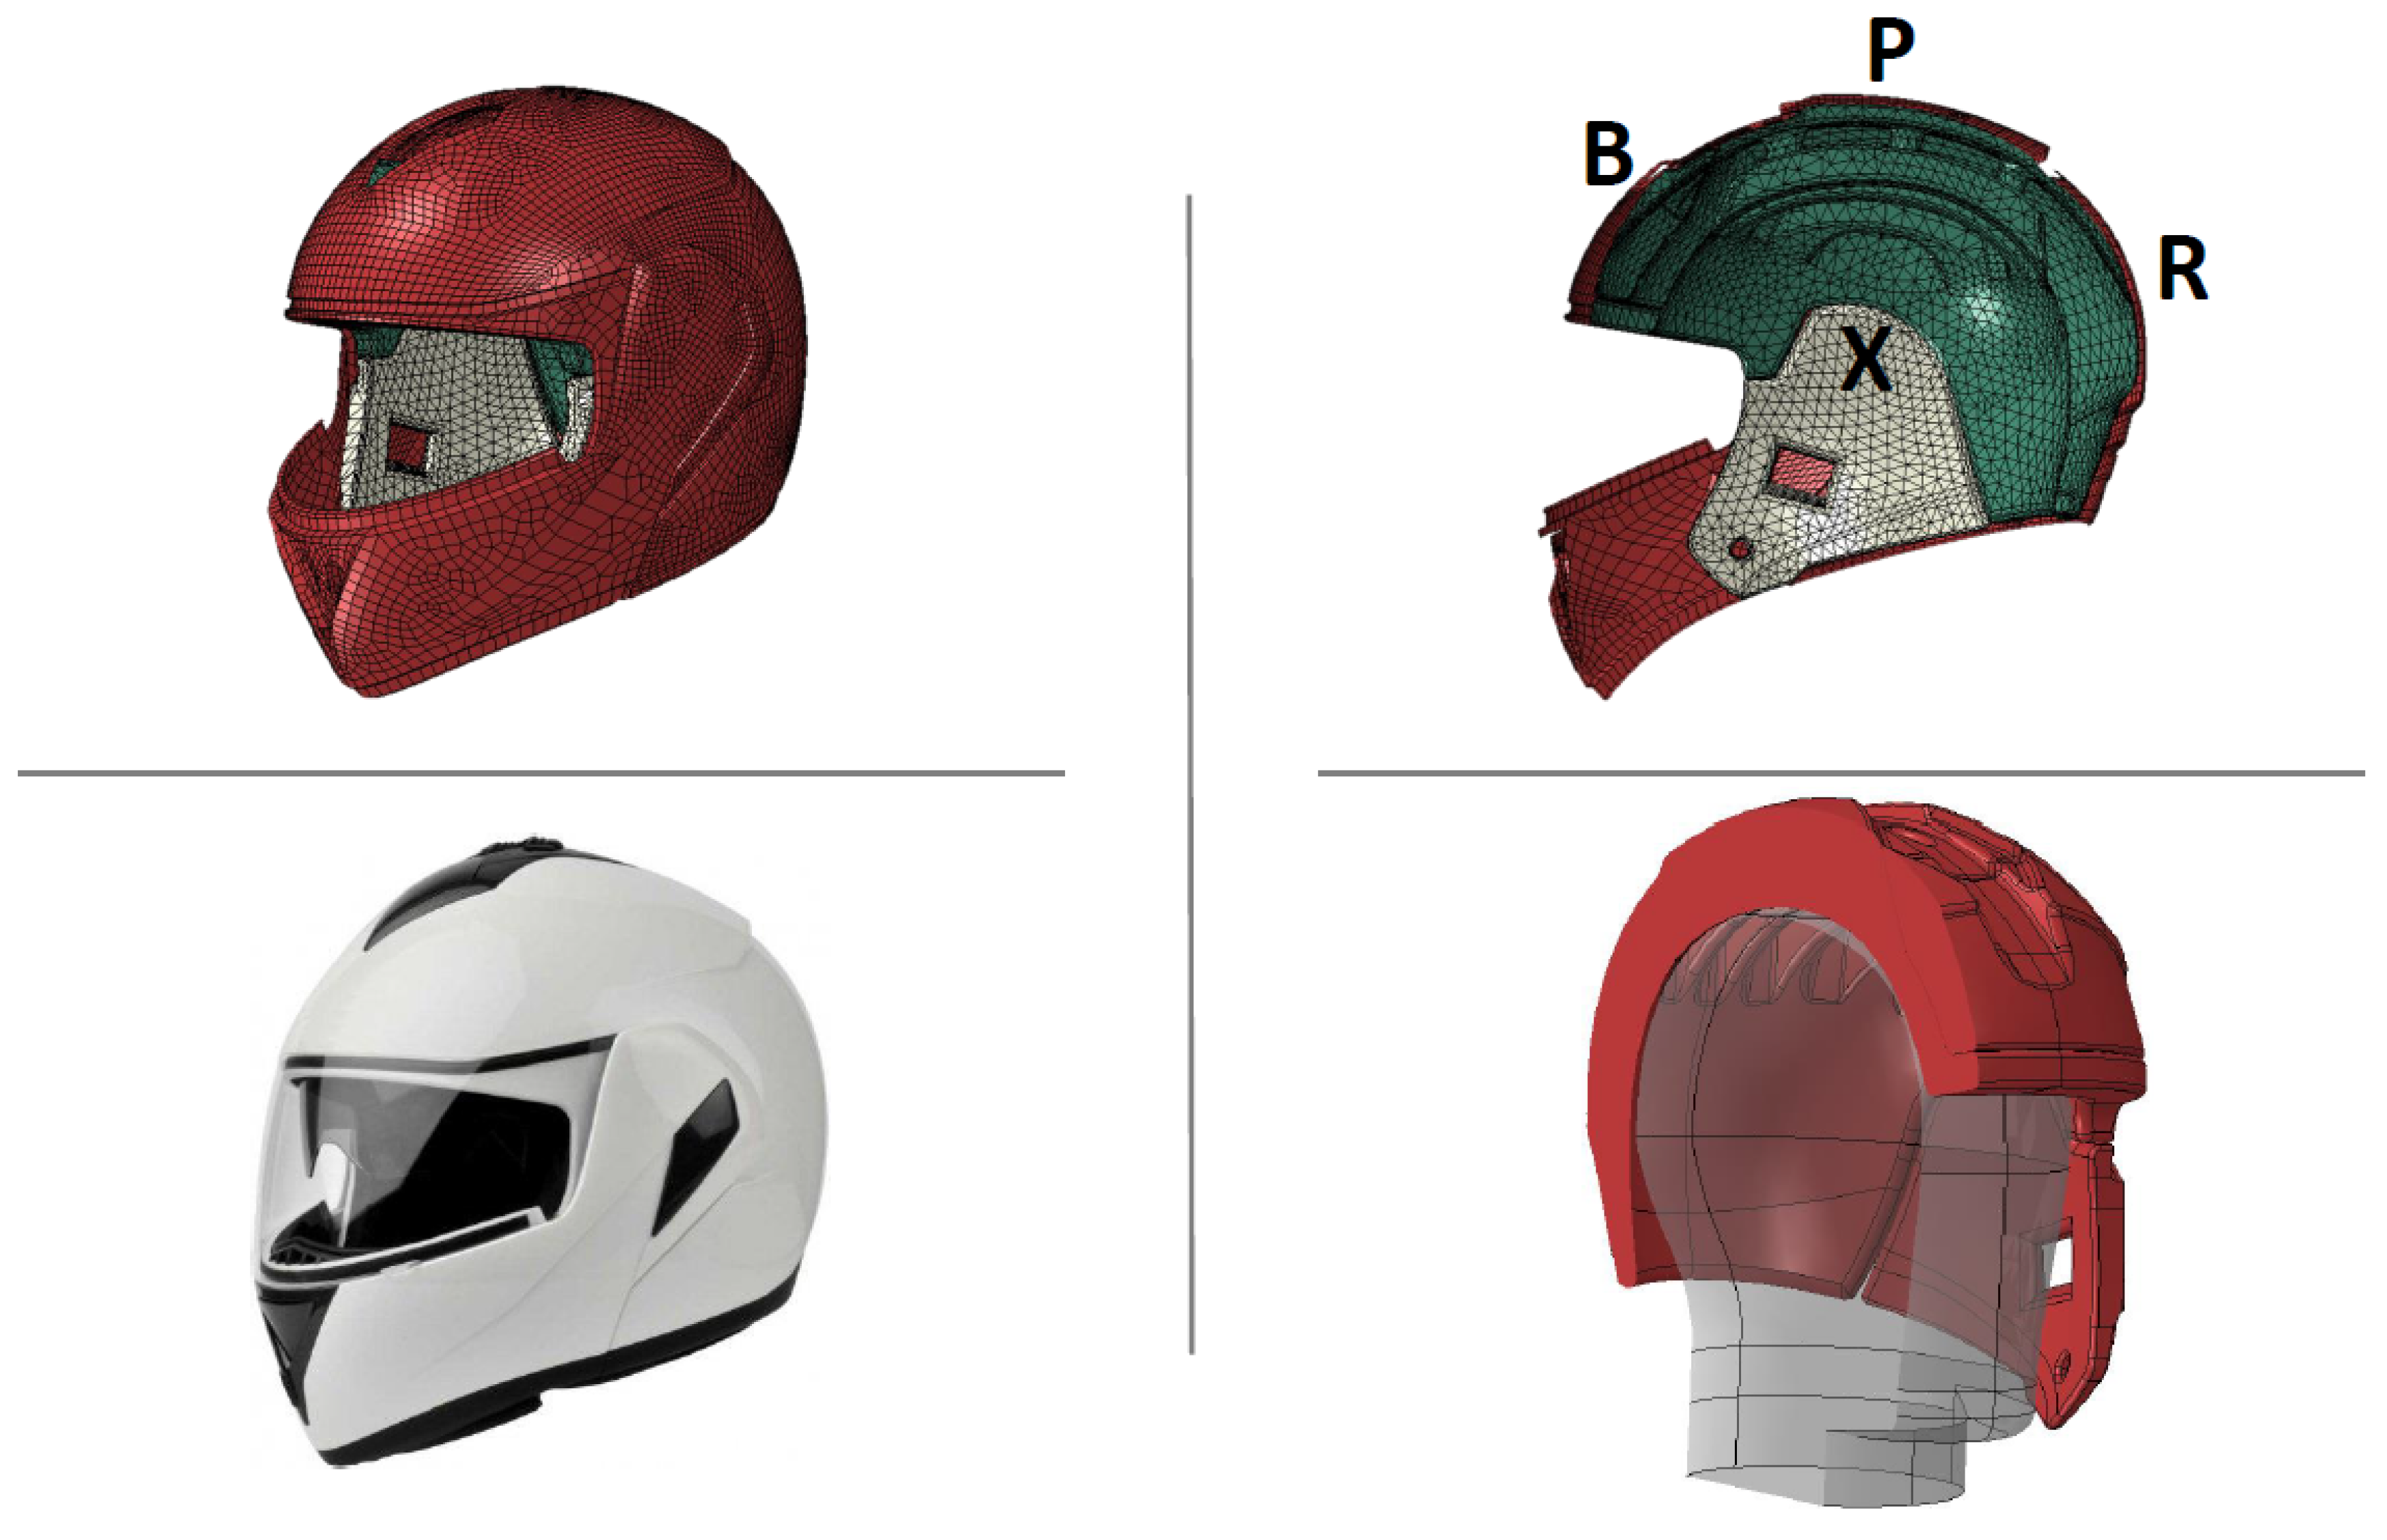 Applied Sciences | Free Full-Text | Helmet Design Based on the Optimization  of Biocomposite Energy-Absorbing Liners under Multi-Impact Loading | HTML